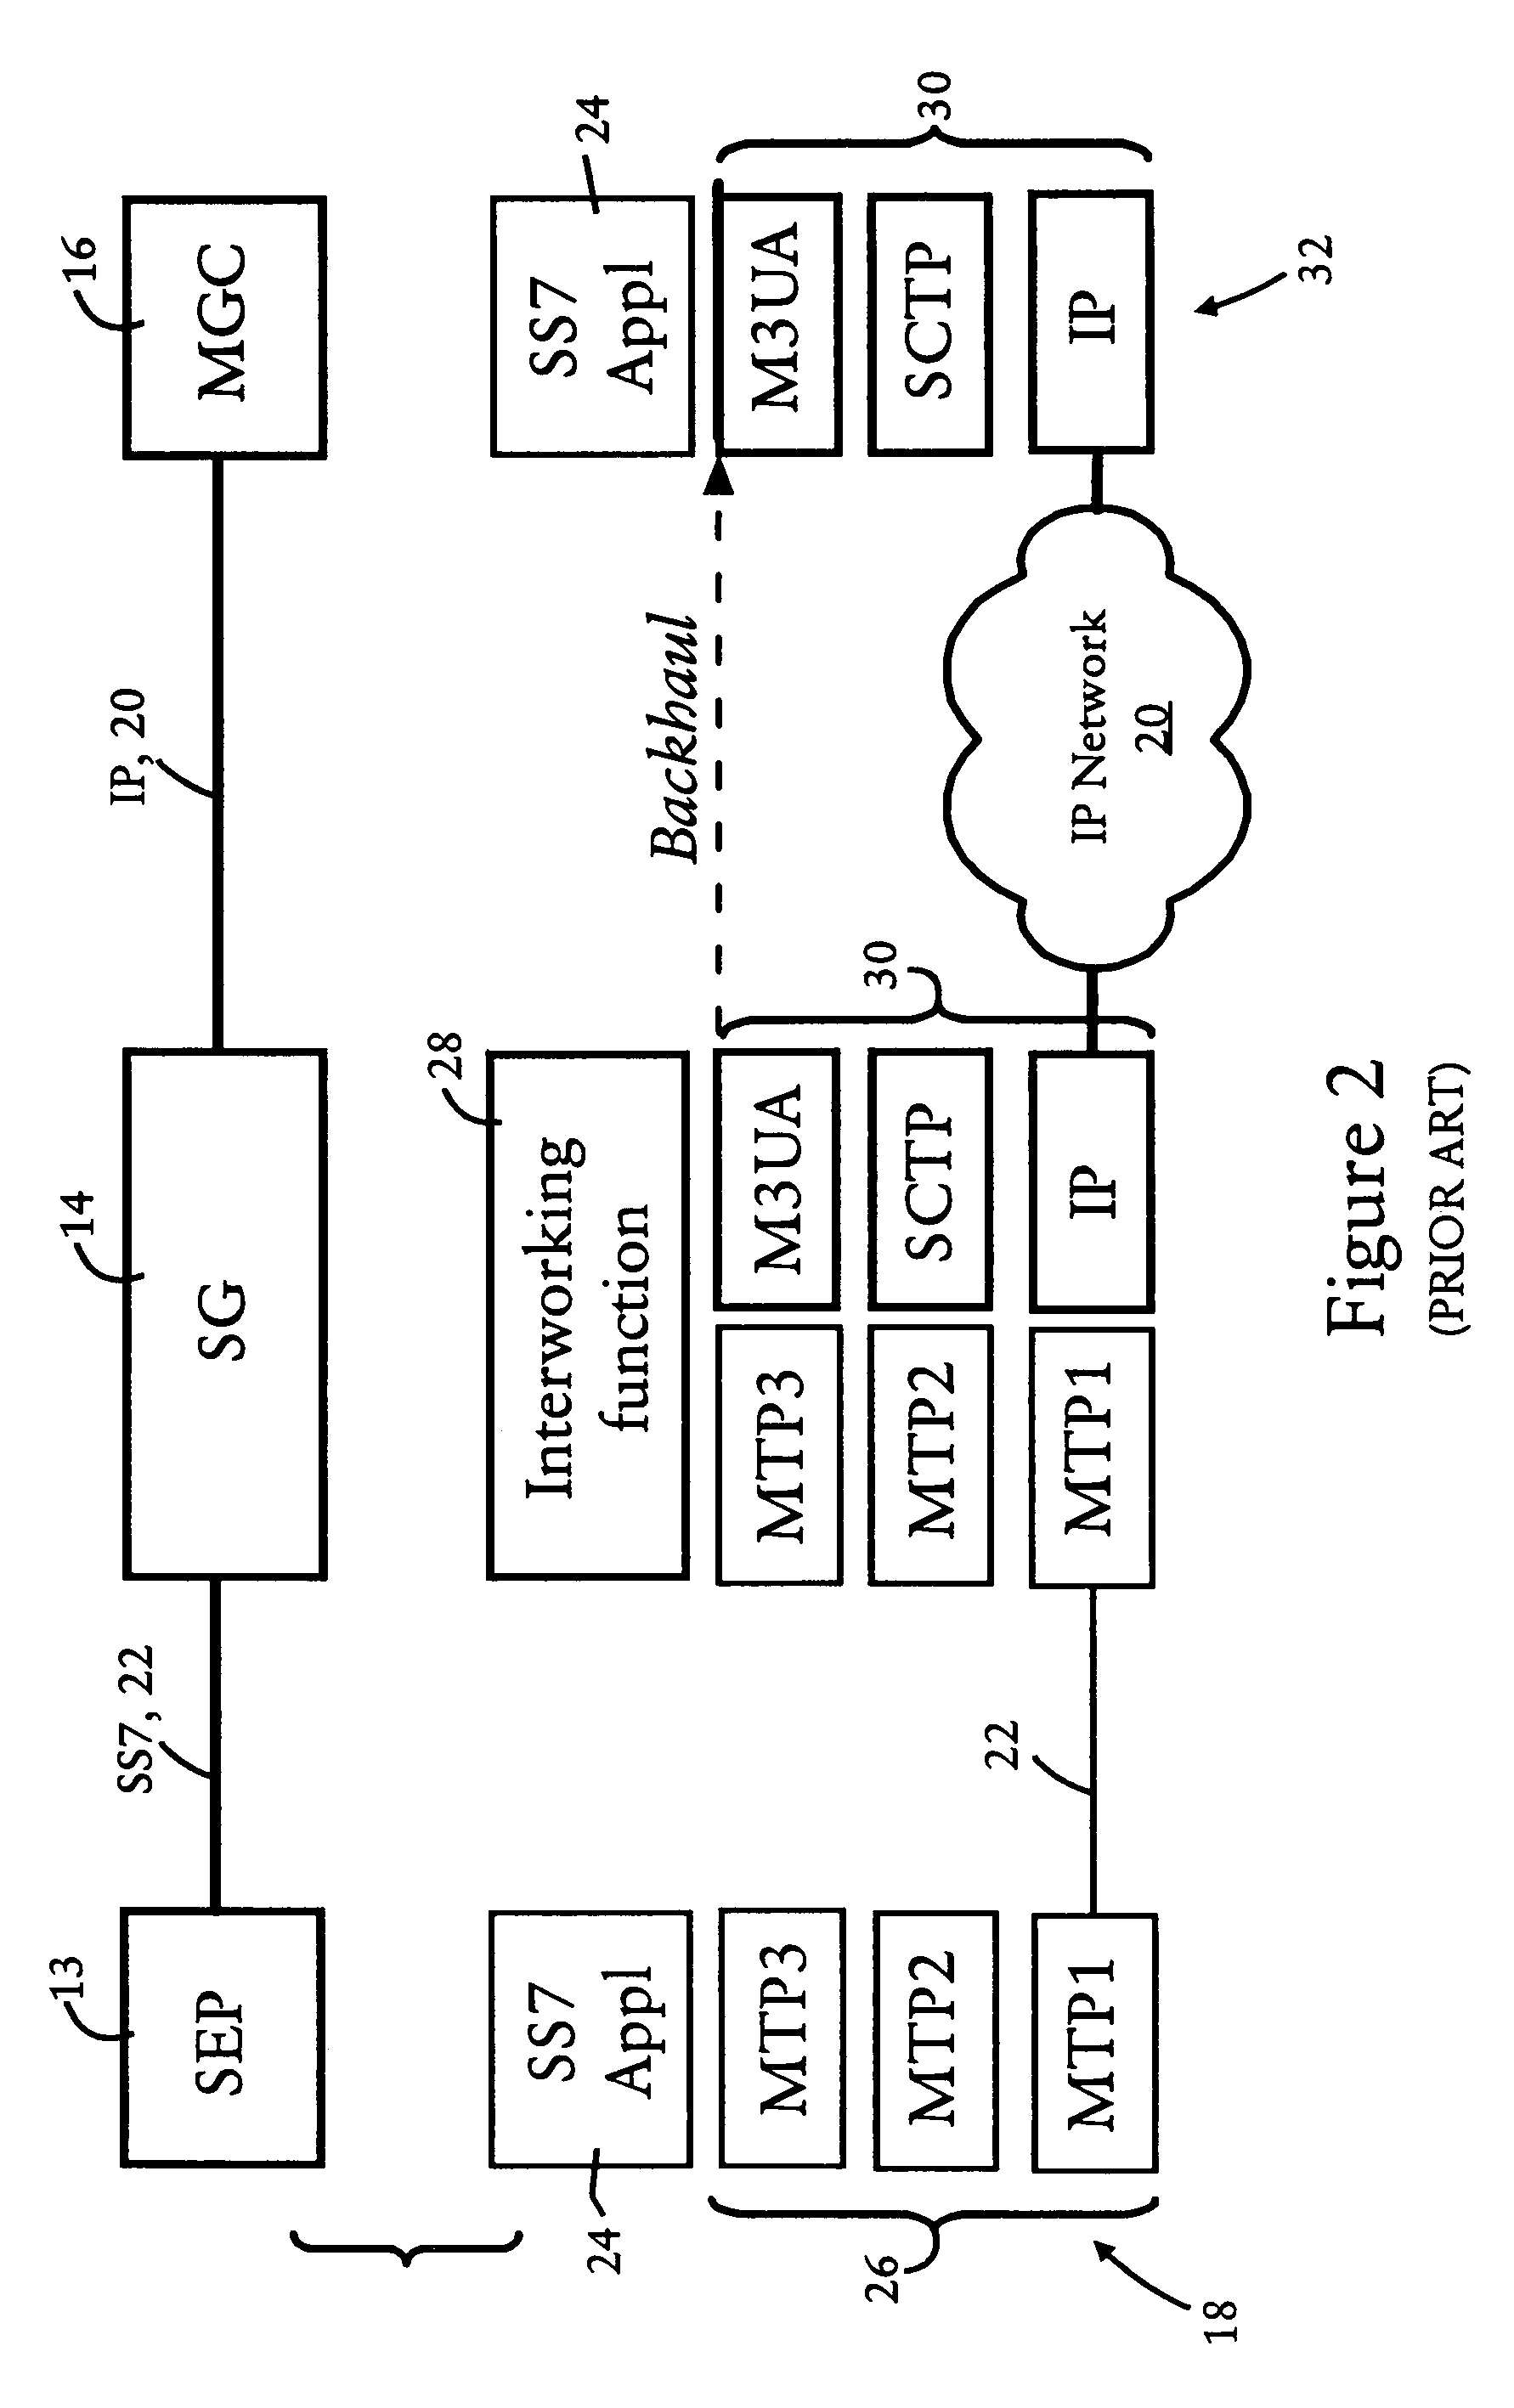 Arrangement for controlling congestion for multiple host groups sharing a single signaling point code in an IP-based network using respective group congestion levels